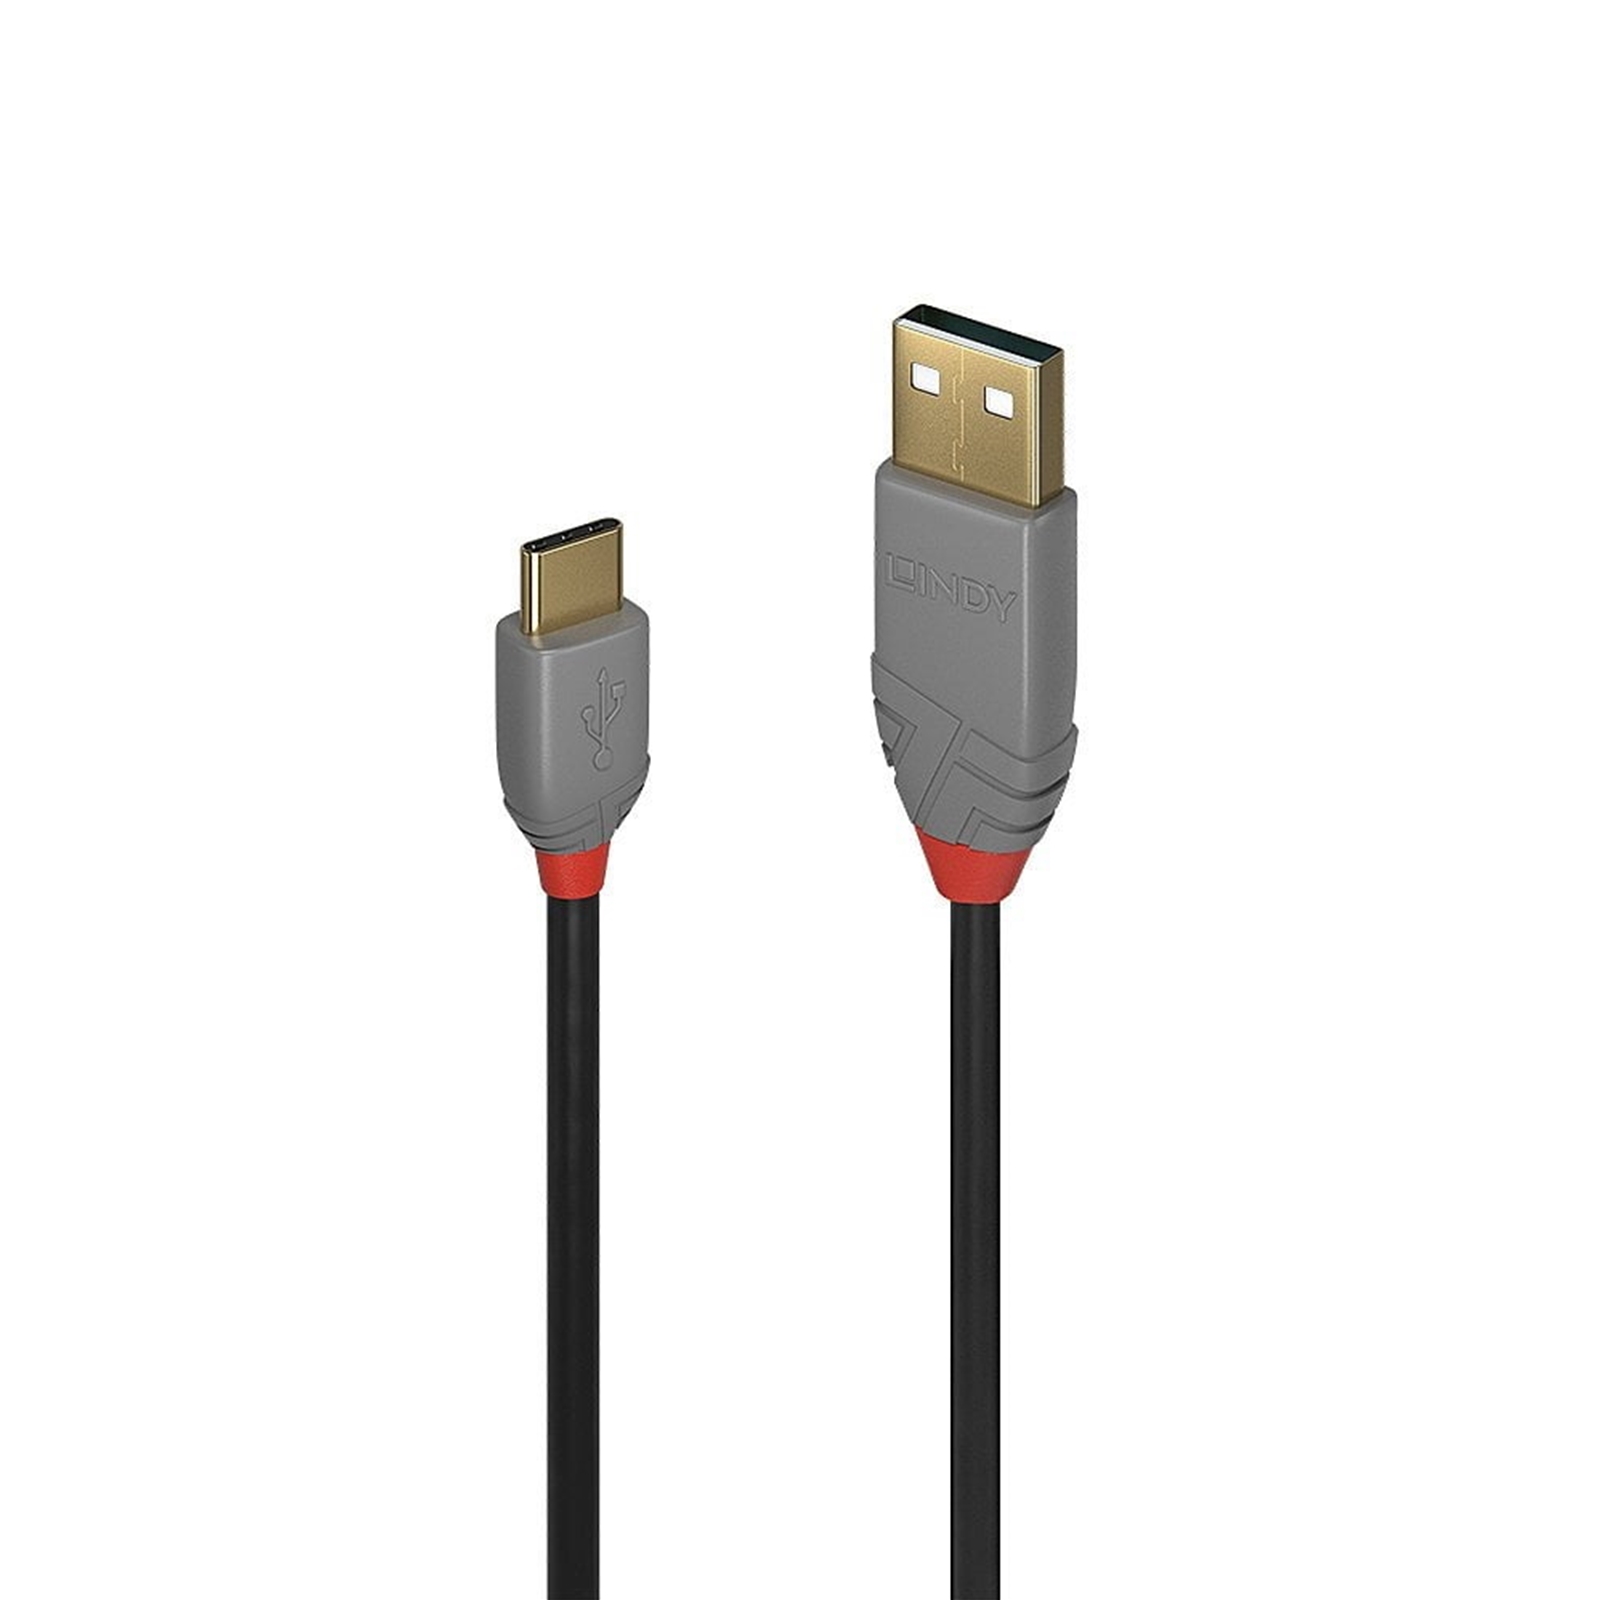 LINDY 36886 Anthra Line USB Cable, USB 2.0 Type-A (M) to USB 2.0 Type-C (M), 1m, Black & Red, Supports Data Transfer Speeds up to 480Mbps, Robust PVC Housing, Gold Plated Connectors & Contacts, Retail Polybag Packaging